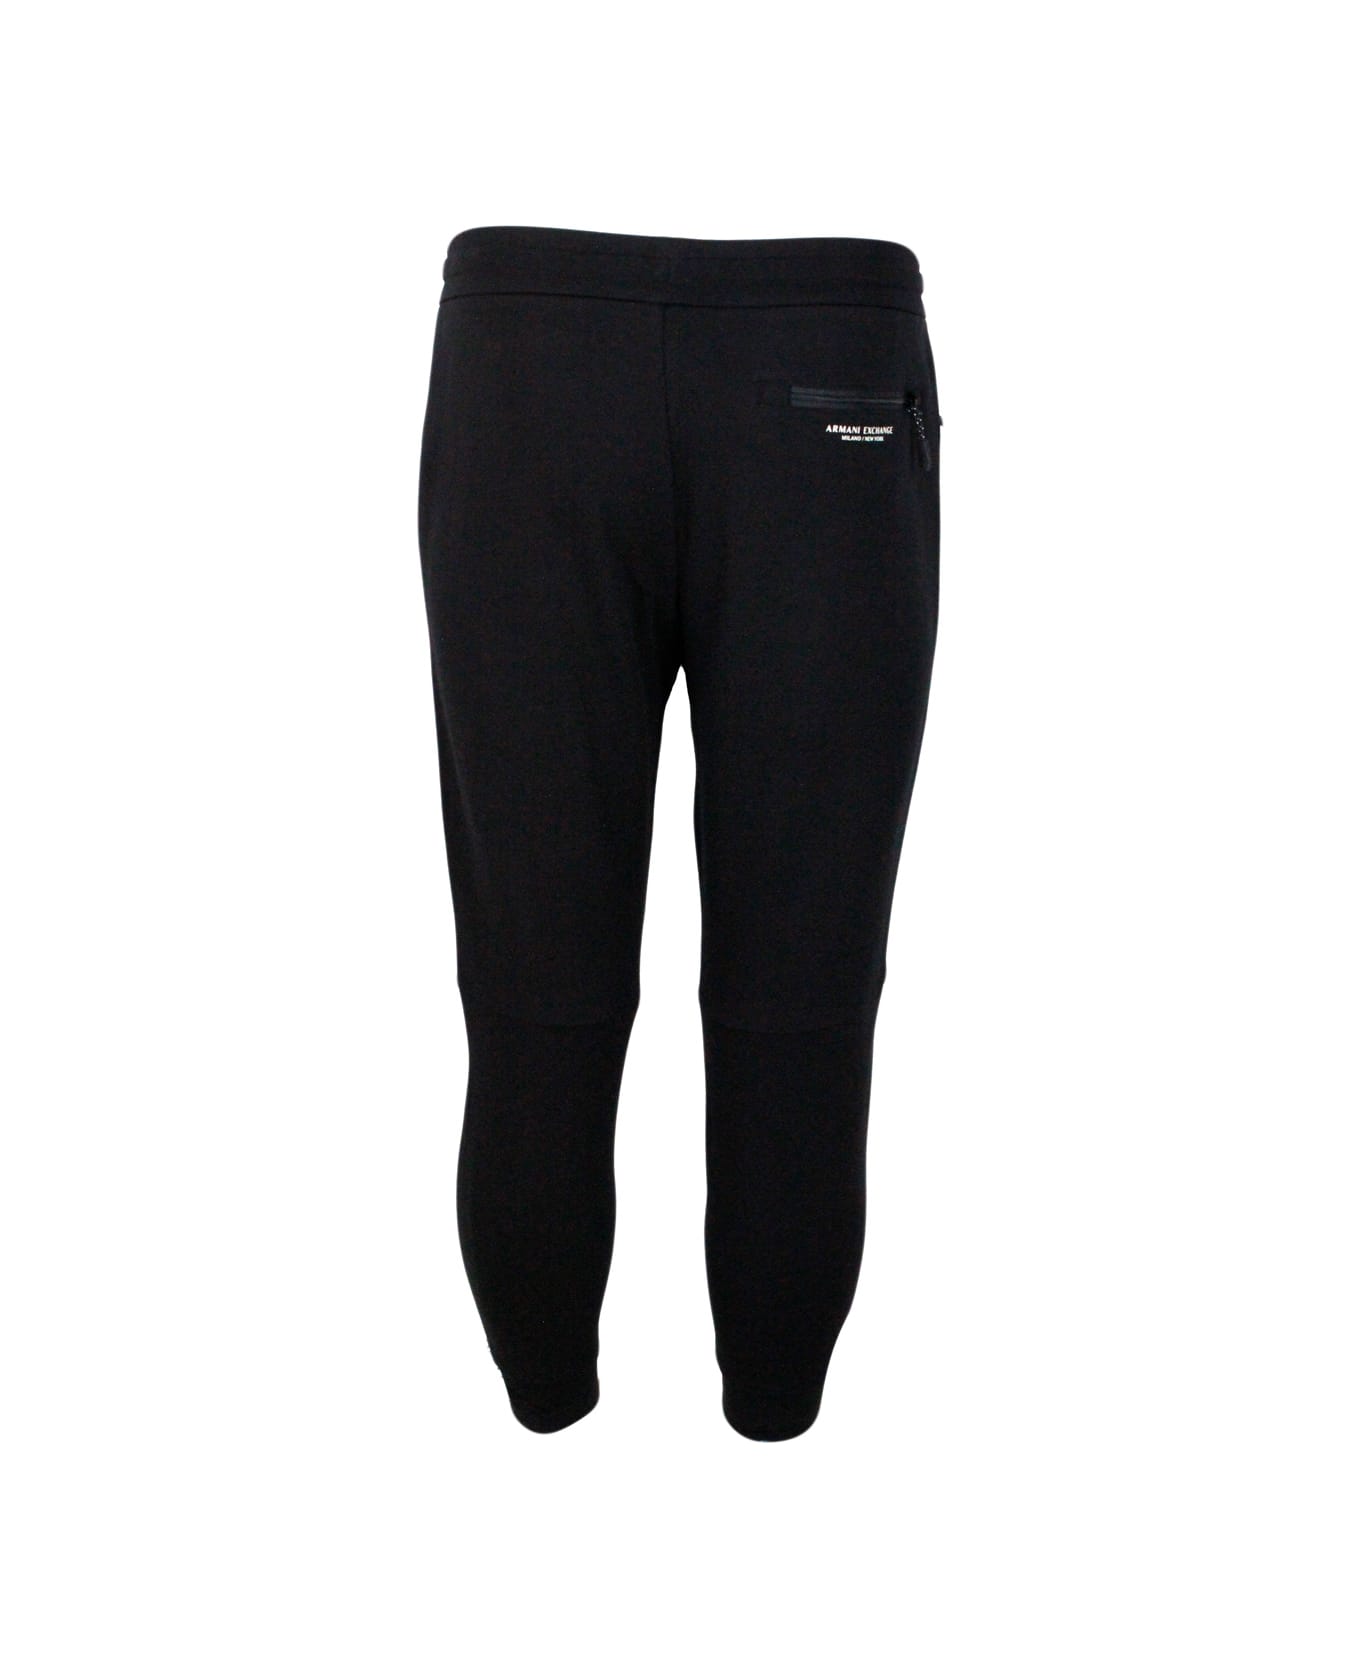 Armani Collezioni Cotton Fleece Jogging Trousers With Drawstring At The Waist And Cuff At The Bottom - Black